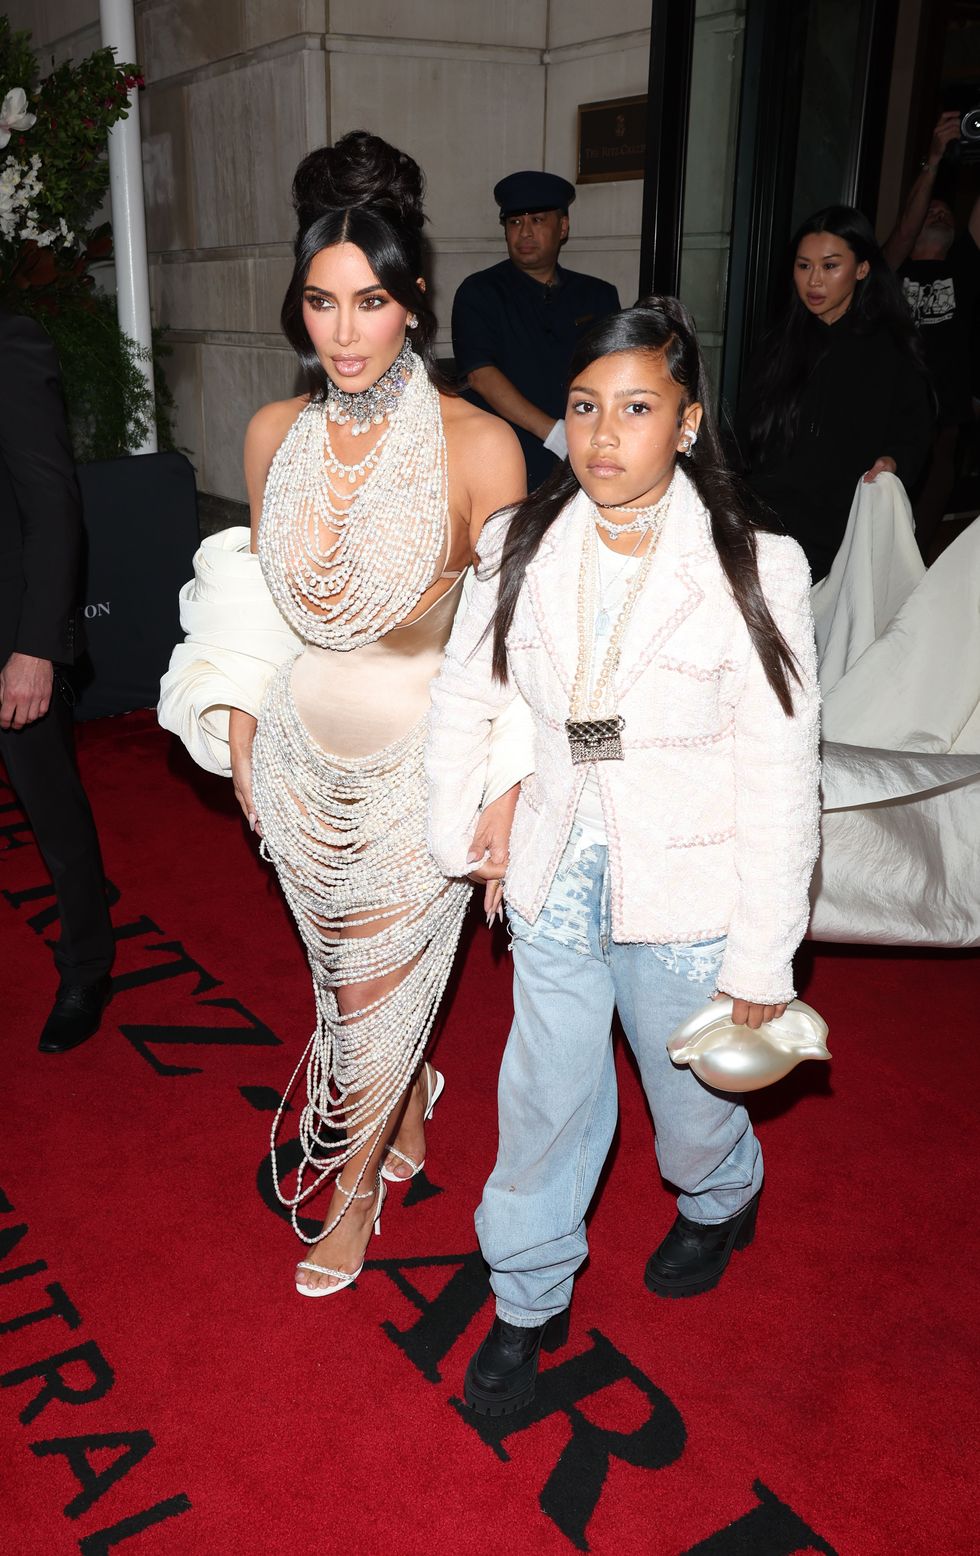 Kim Kardashian Wears A Dress Made Entirely Of Pearls To The 2023 Met